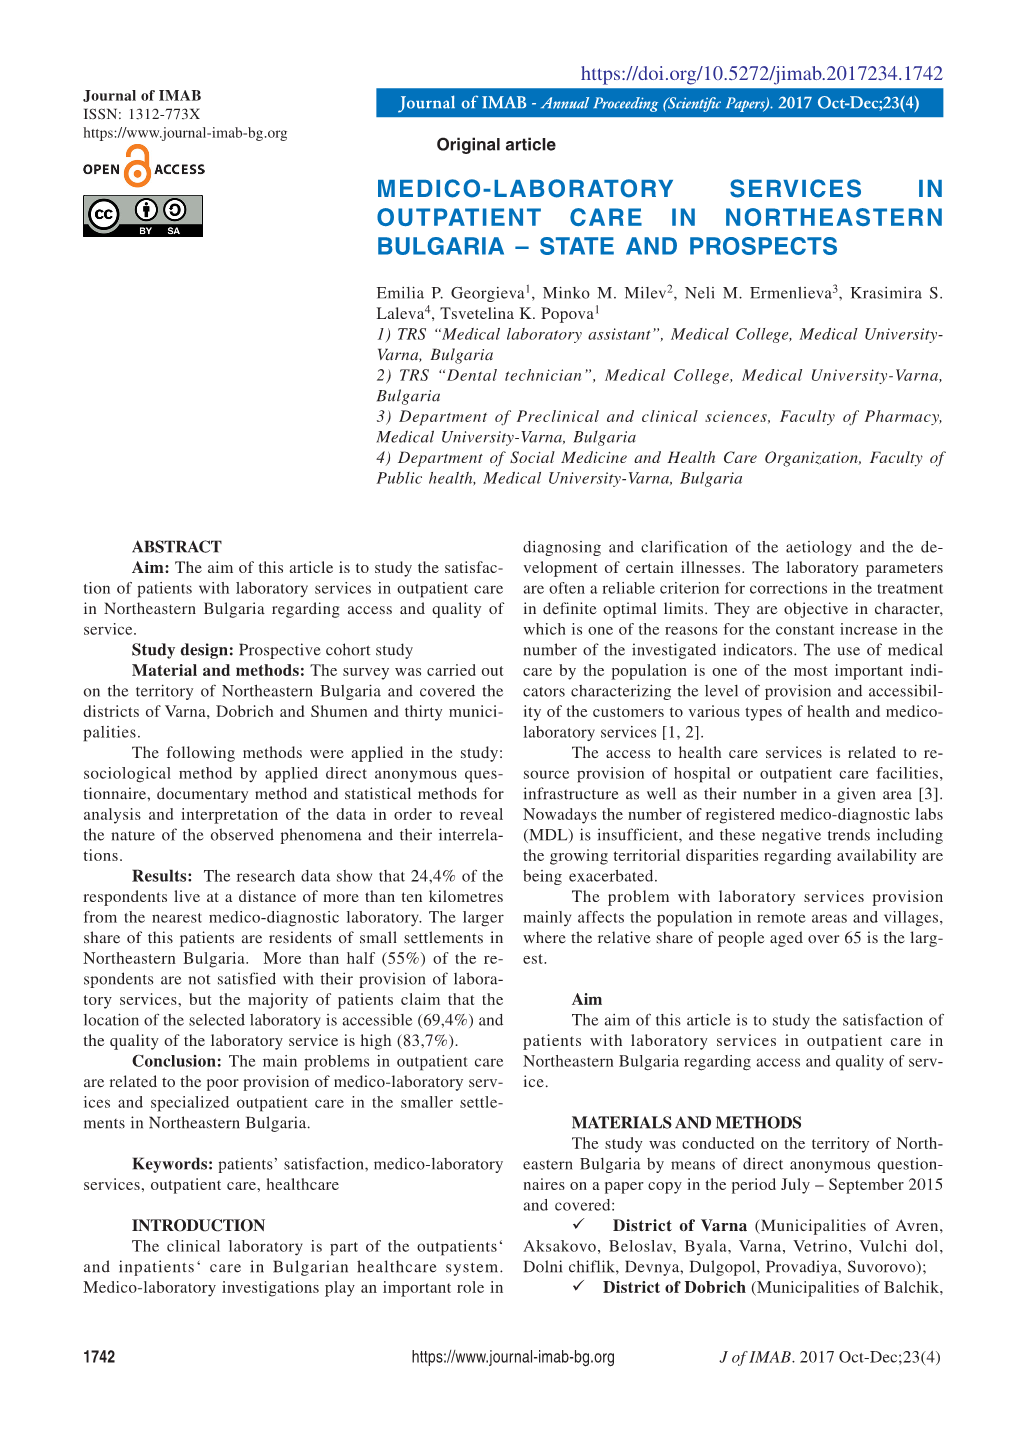 Medico-Laboratory Services in Outpatient Care in Northeastern Bulgaria – State and Prospects